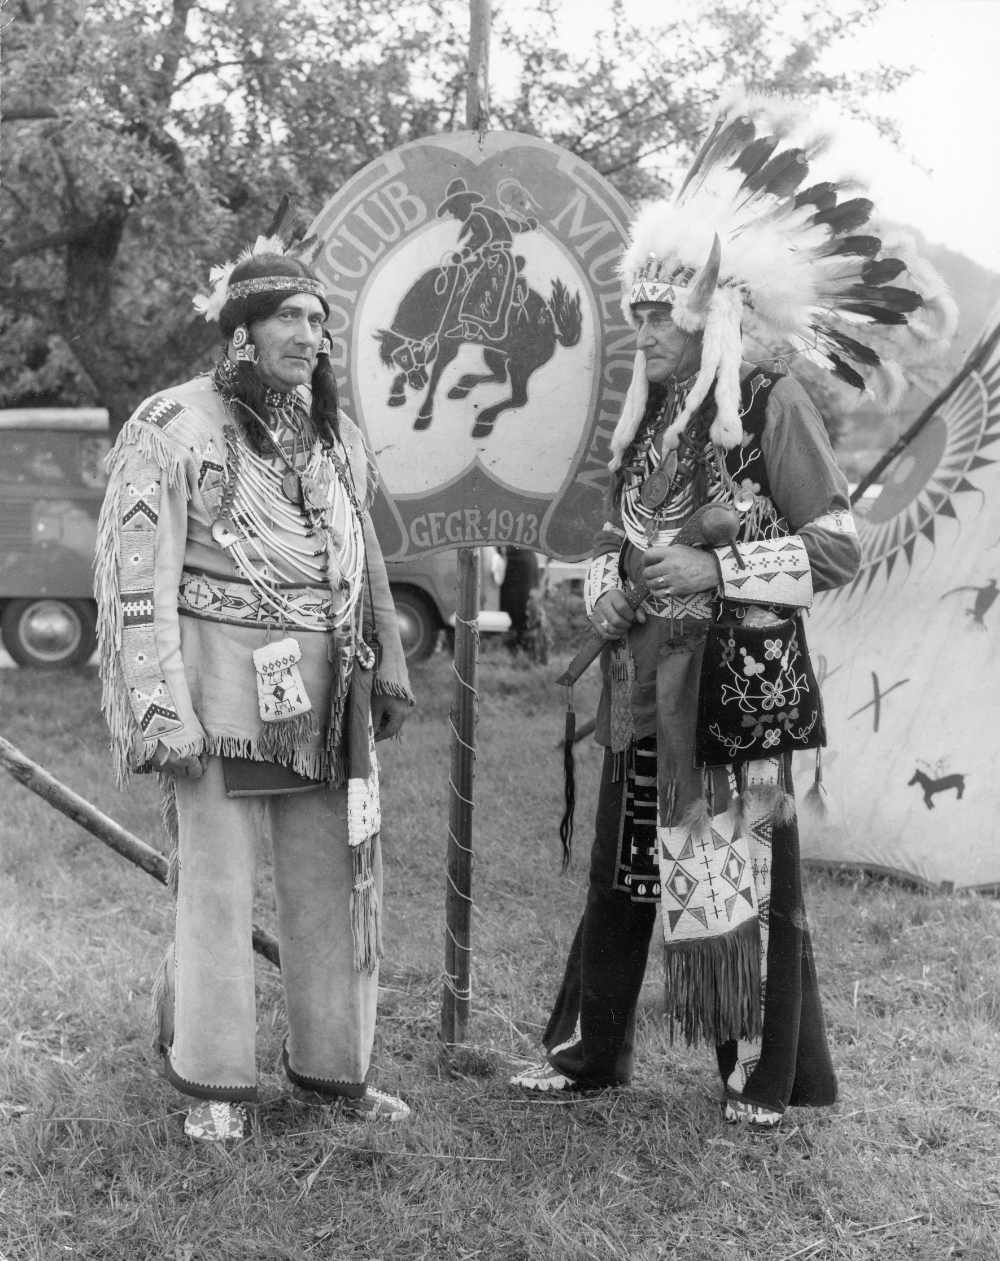 Archival image of two members of the Munich Cowboy Club dressed up in pseudo-Native American garb.